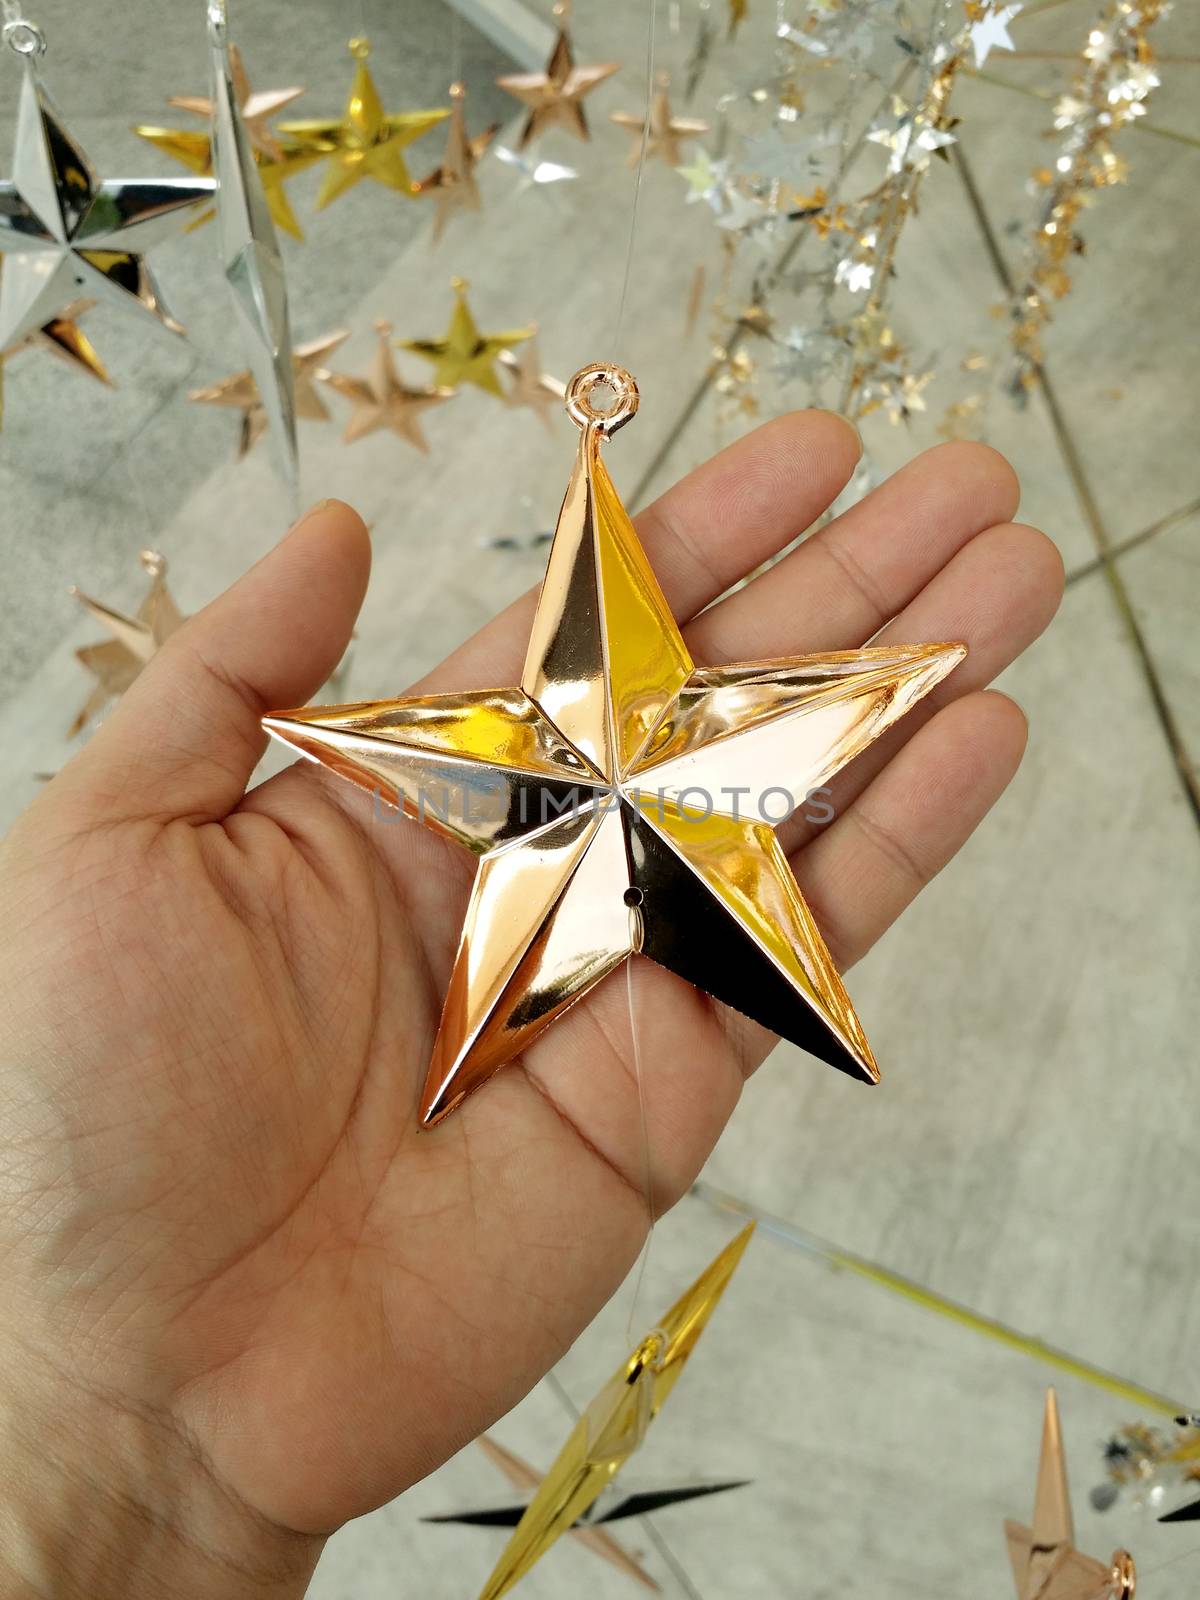 Man Hand and decoration star. by gnepphoto